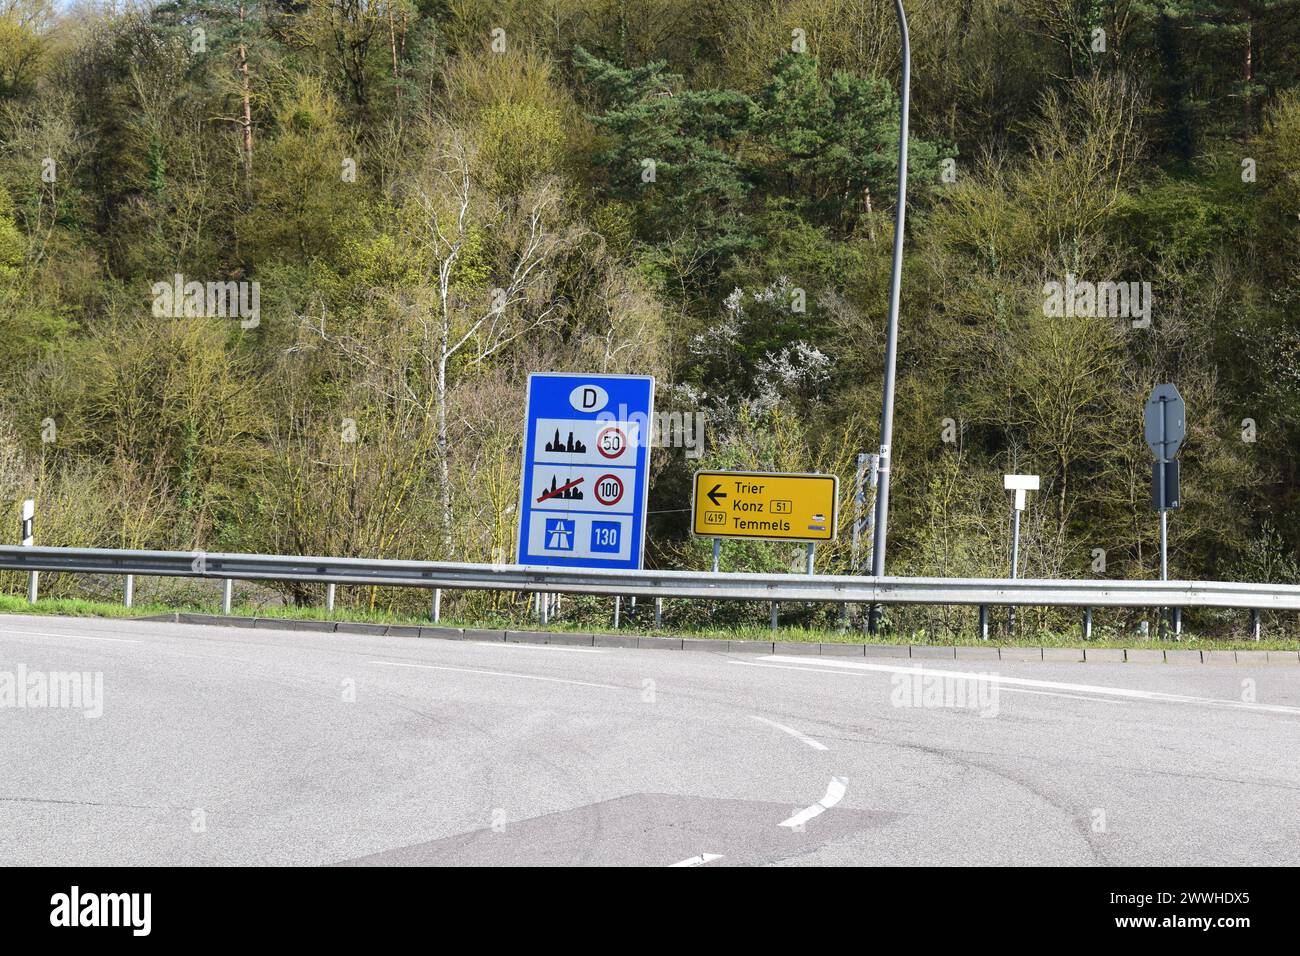 country speed limits for Germany Stock Photo